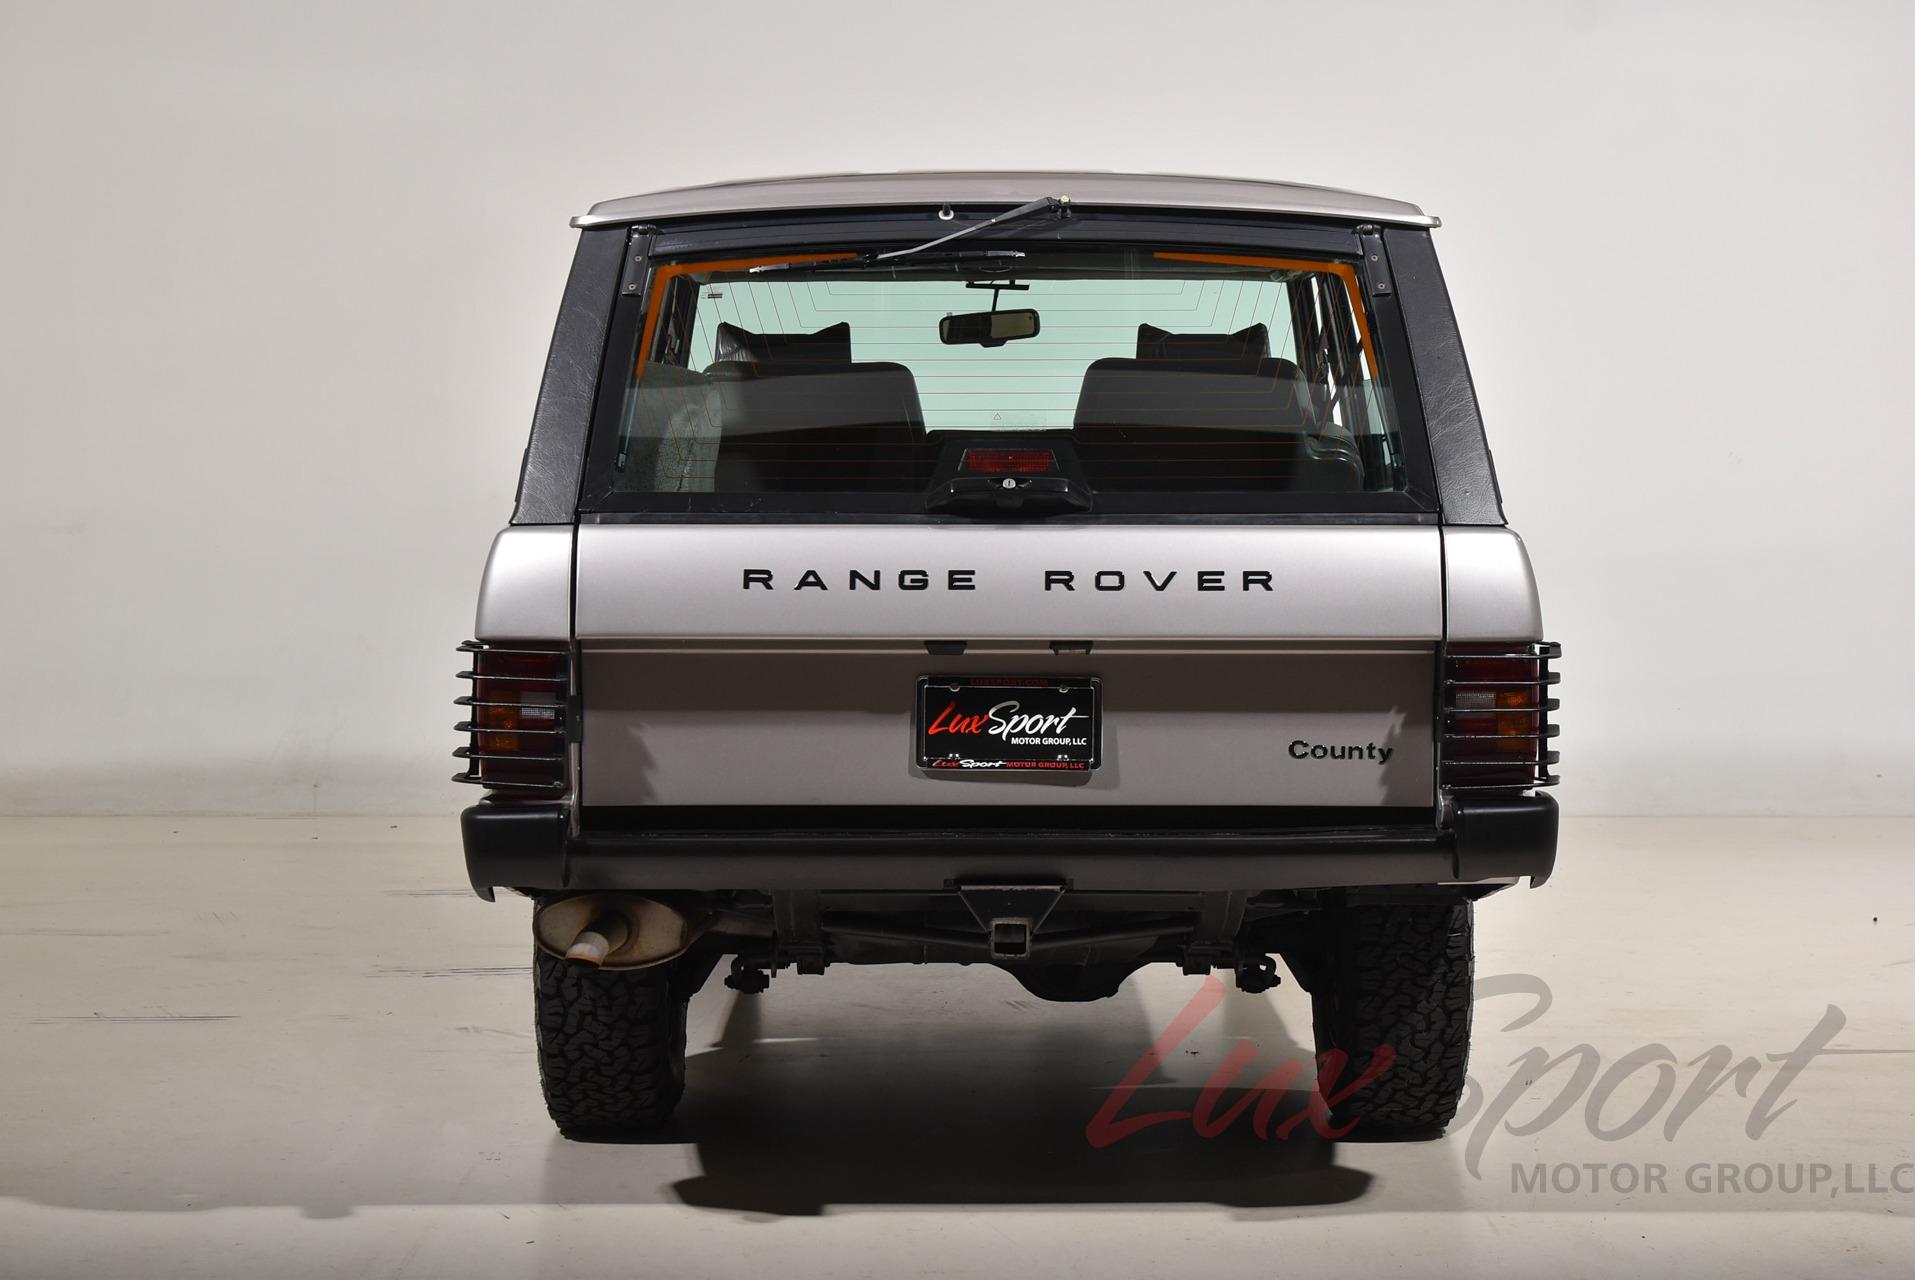 1991 Land Rover Range Rover County SE Stock # 1991196 for sale